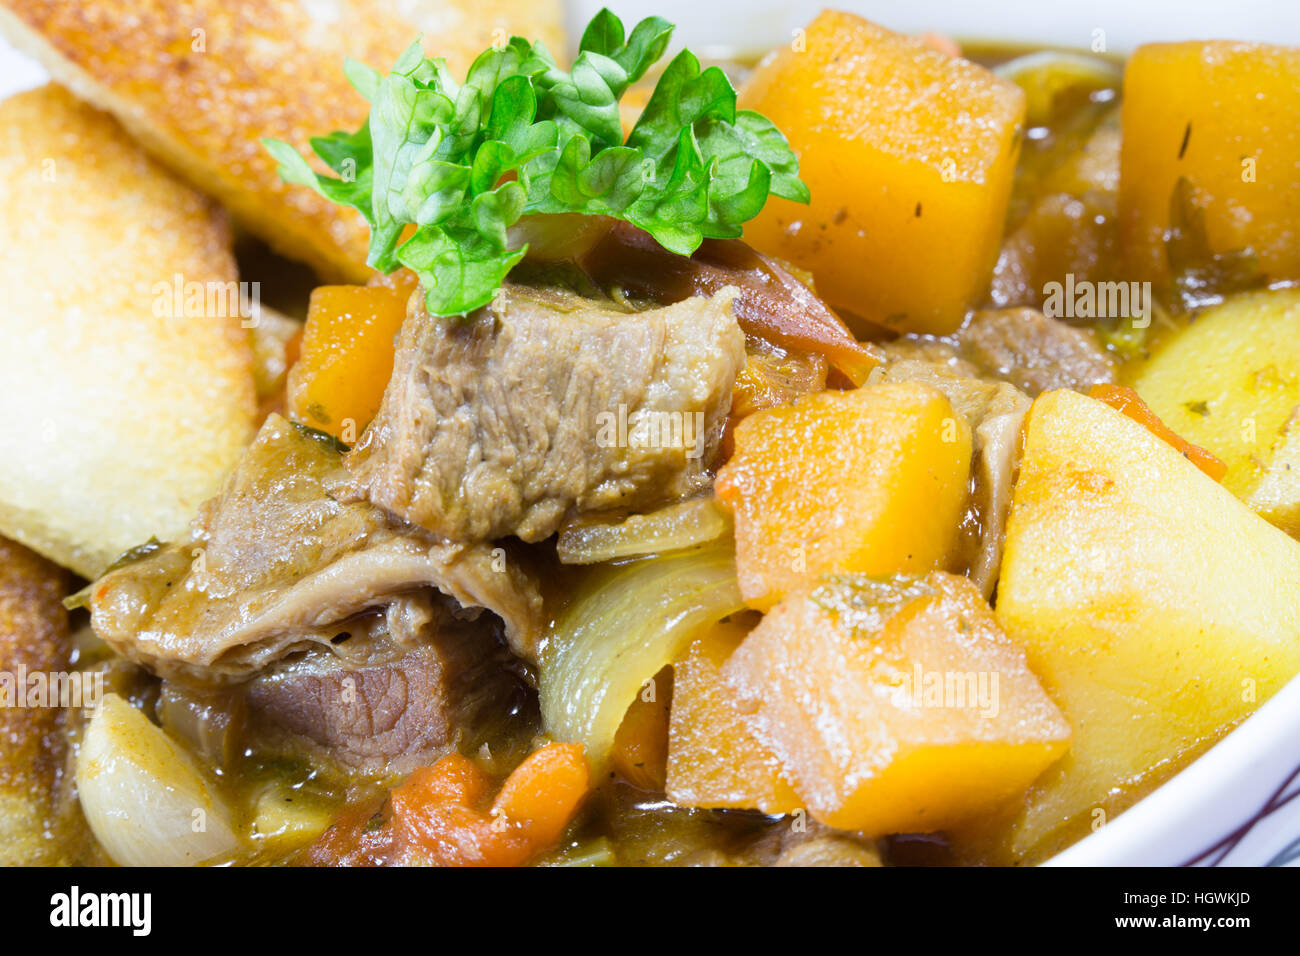 An English pub/restaurant bowl of Beef Casserole served with fried bread croutons. Stock Photo